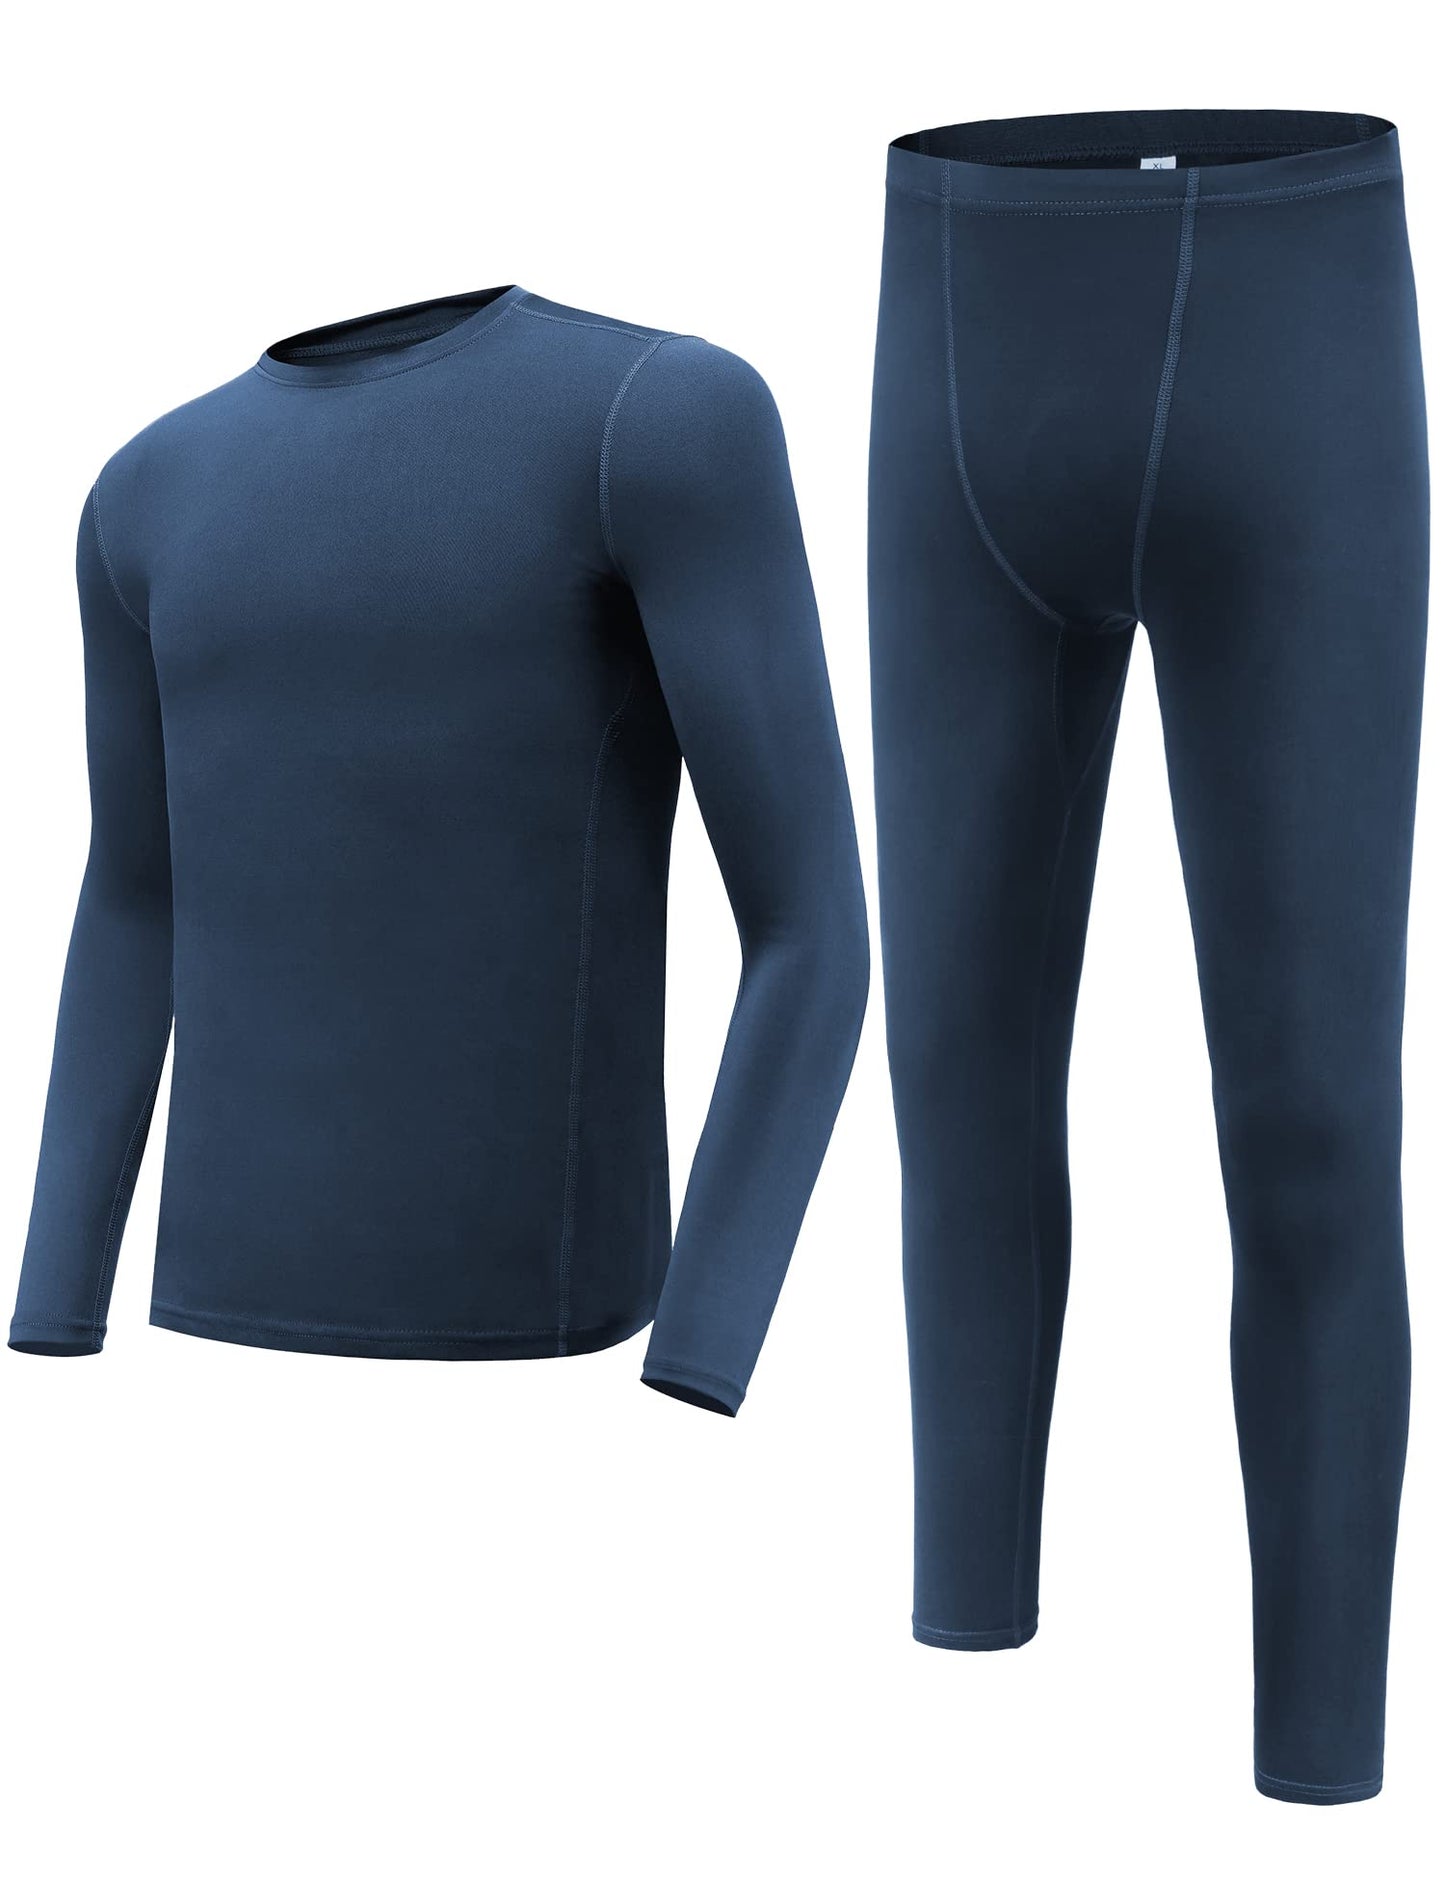 Boy's Thermal Underwear Long Sleeve Athletic Base Layer Compression Underwear Shirt Tights Set (Size-Small)